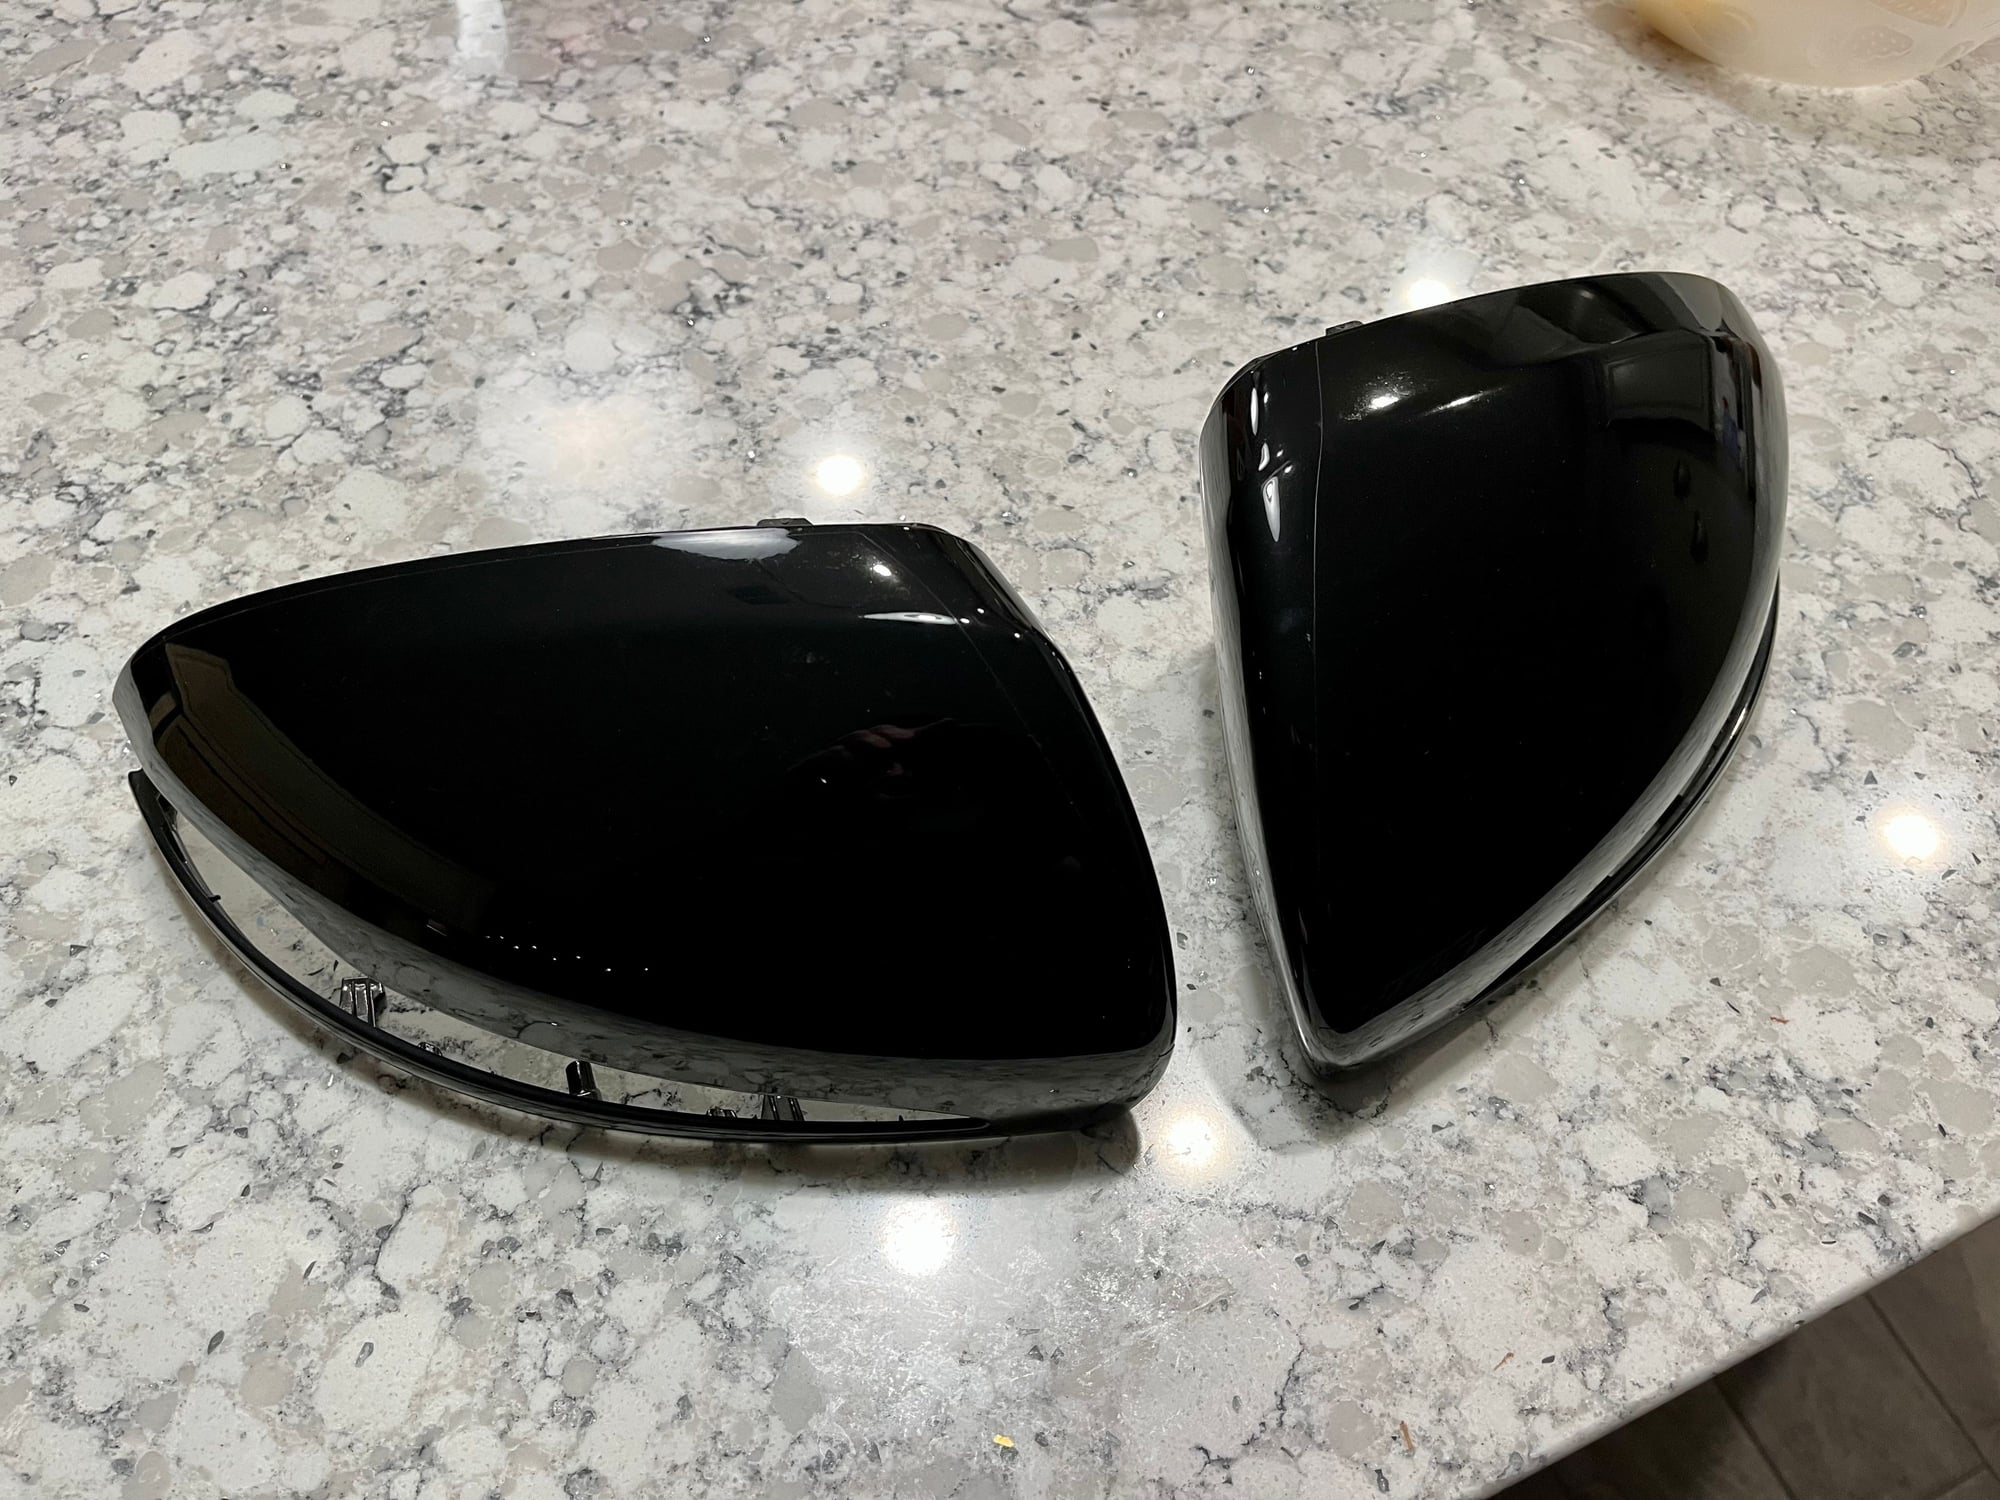 Miscellaneous - OEM W213 parts. AMG Night mirror caps, 19+ AMG heated wheel, airbag... - Used - 2018 to 2023 Mercedes-Benz E63 AMG S - Fernandina Beach, FL 32034, United States